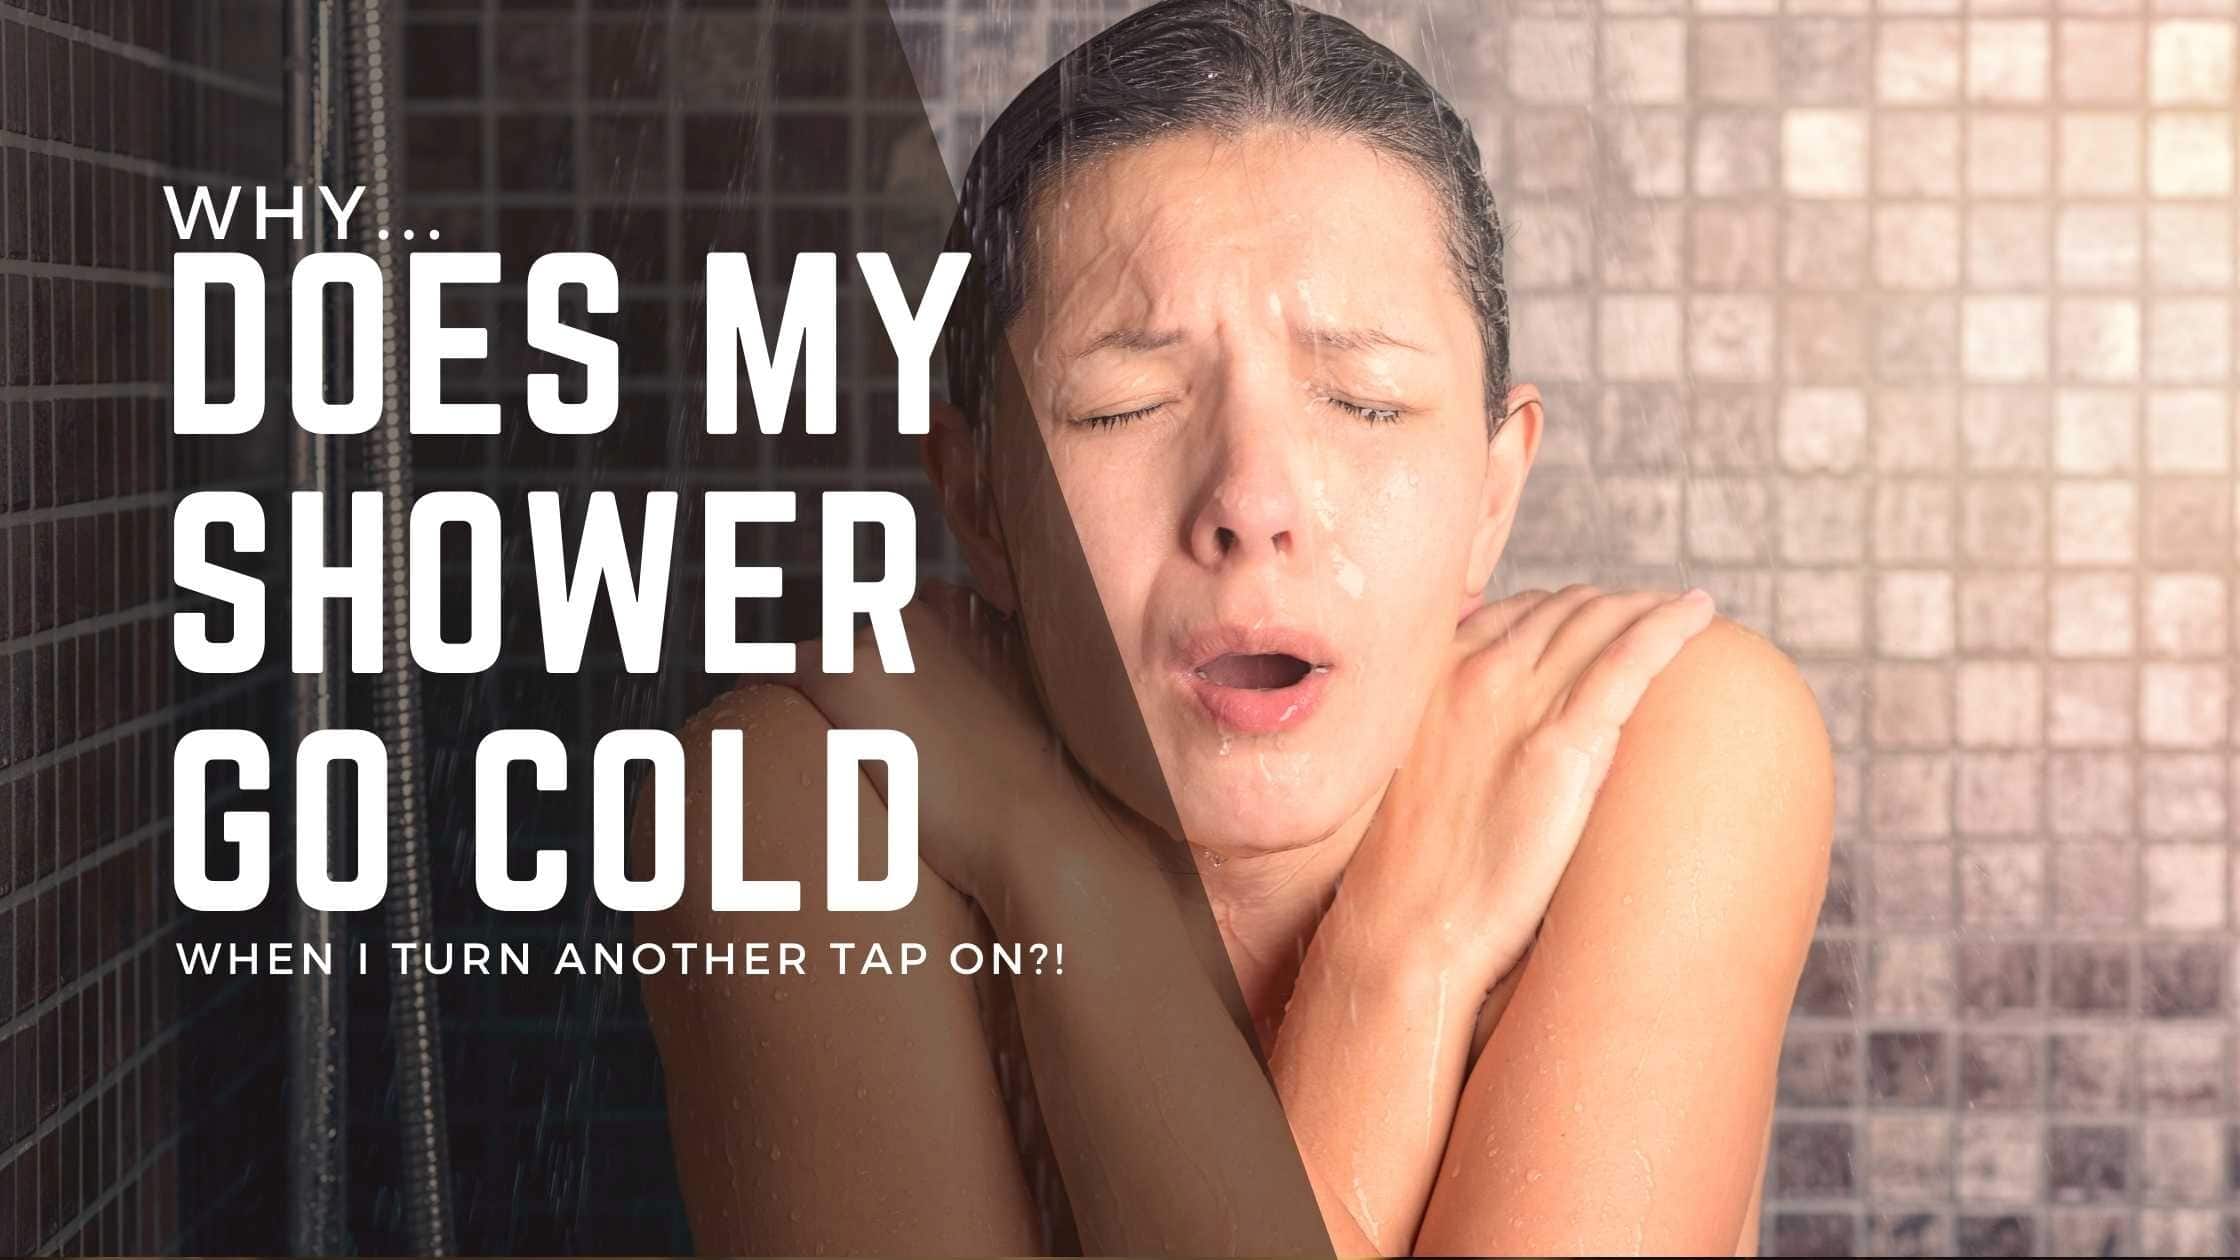 Why Does My Shower Go Cold When I Turn Another Tap On